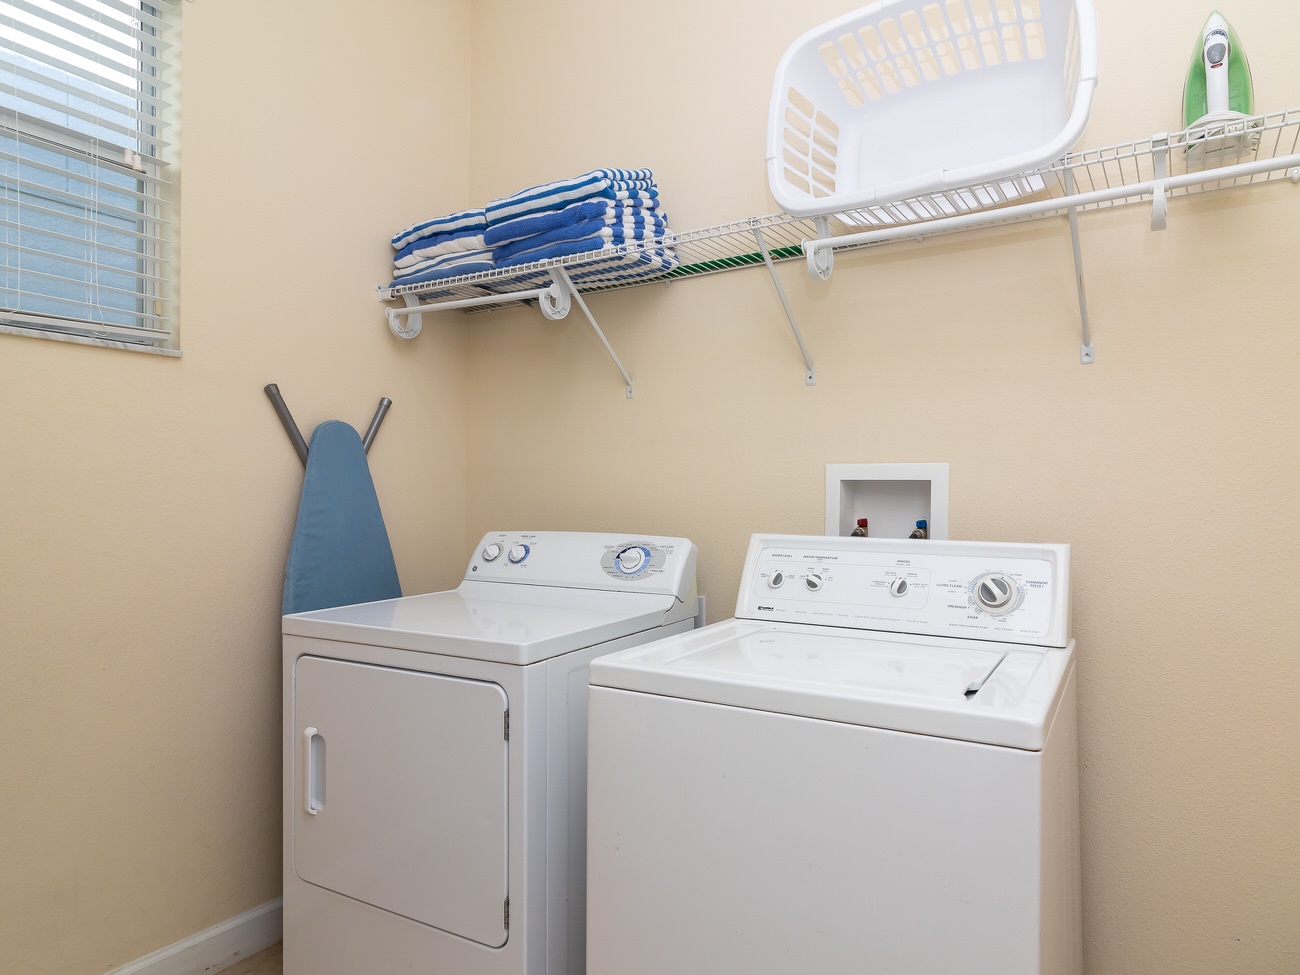 Washer and dryer in the laundry room